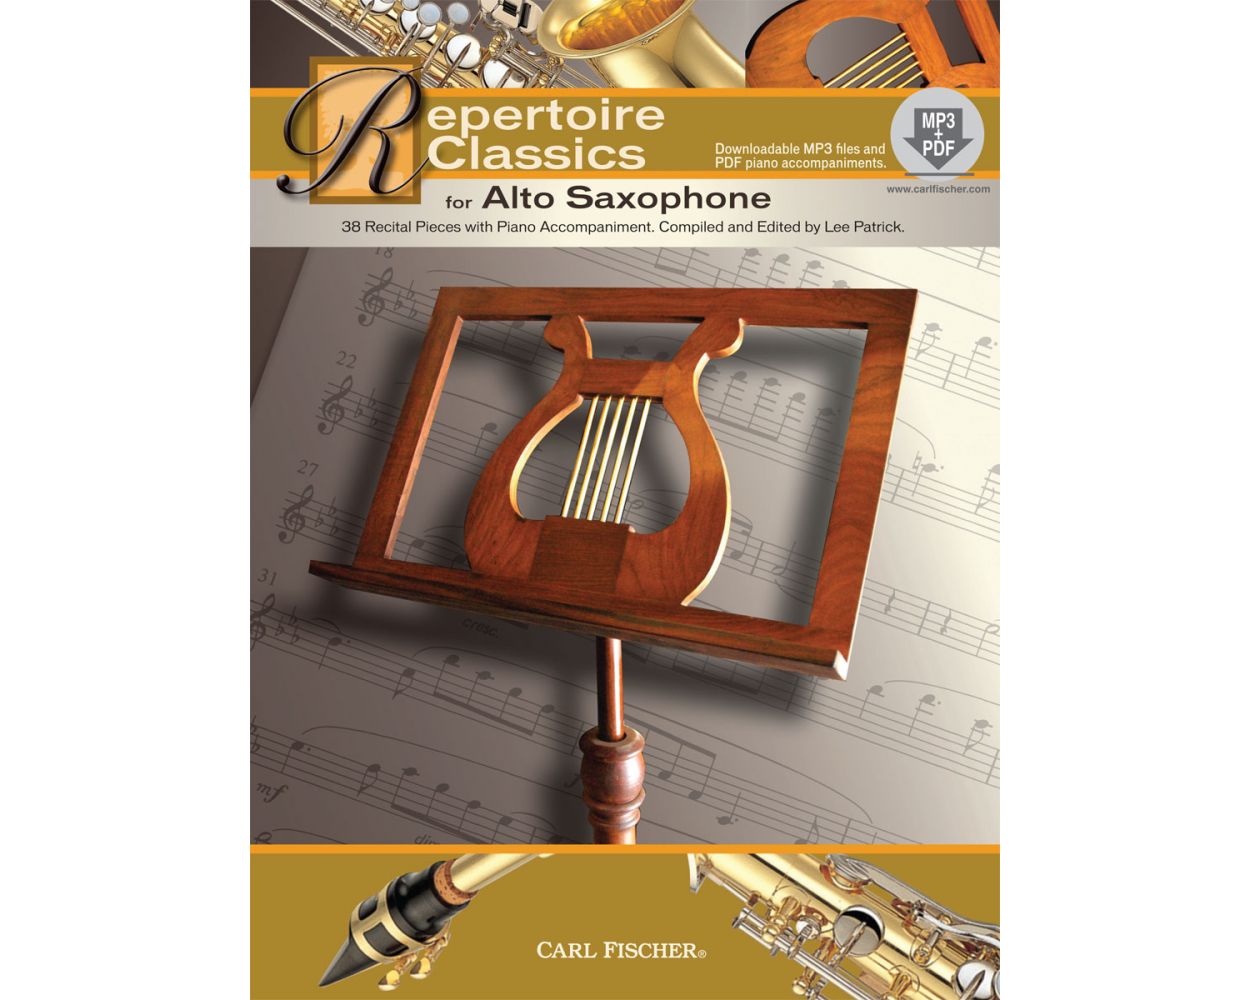 Repertoire Classics for Alto Saxophone with MP3 and PDF